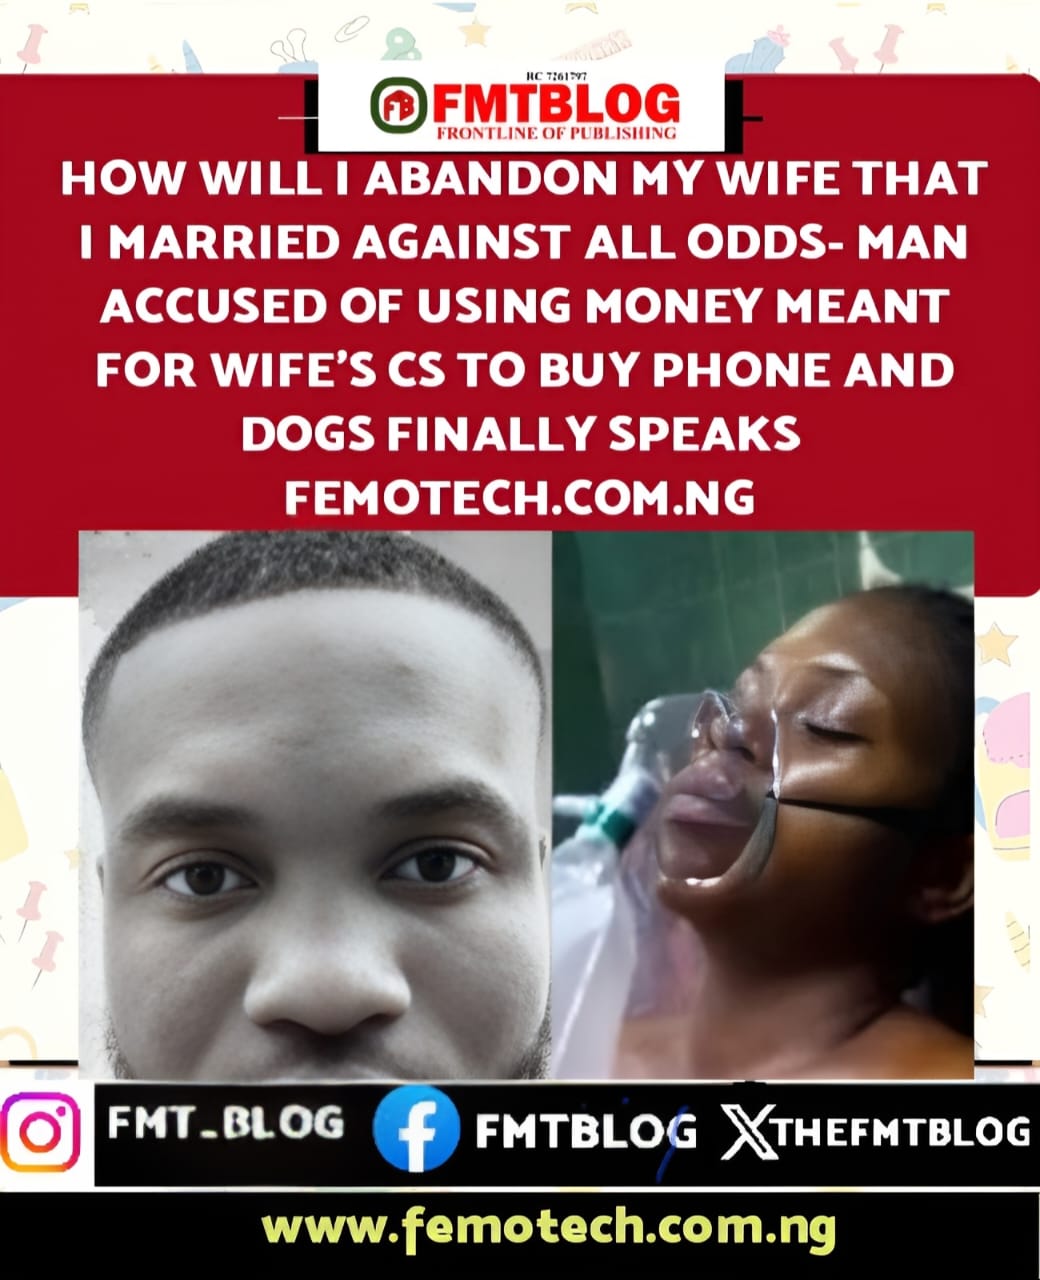 How Will I Abandon My Wife That I Married Against All Odds- Man Accused Of Using Money Meant For Wife’s CS To Buy Phone And Dog Finally Speaks